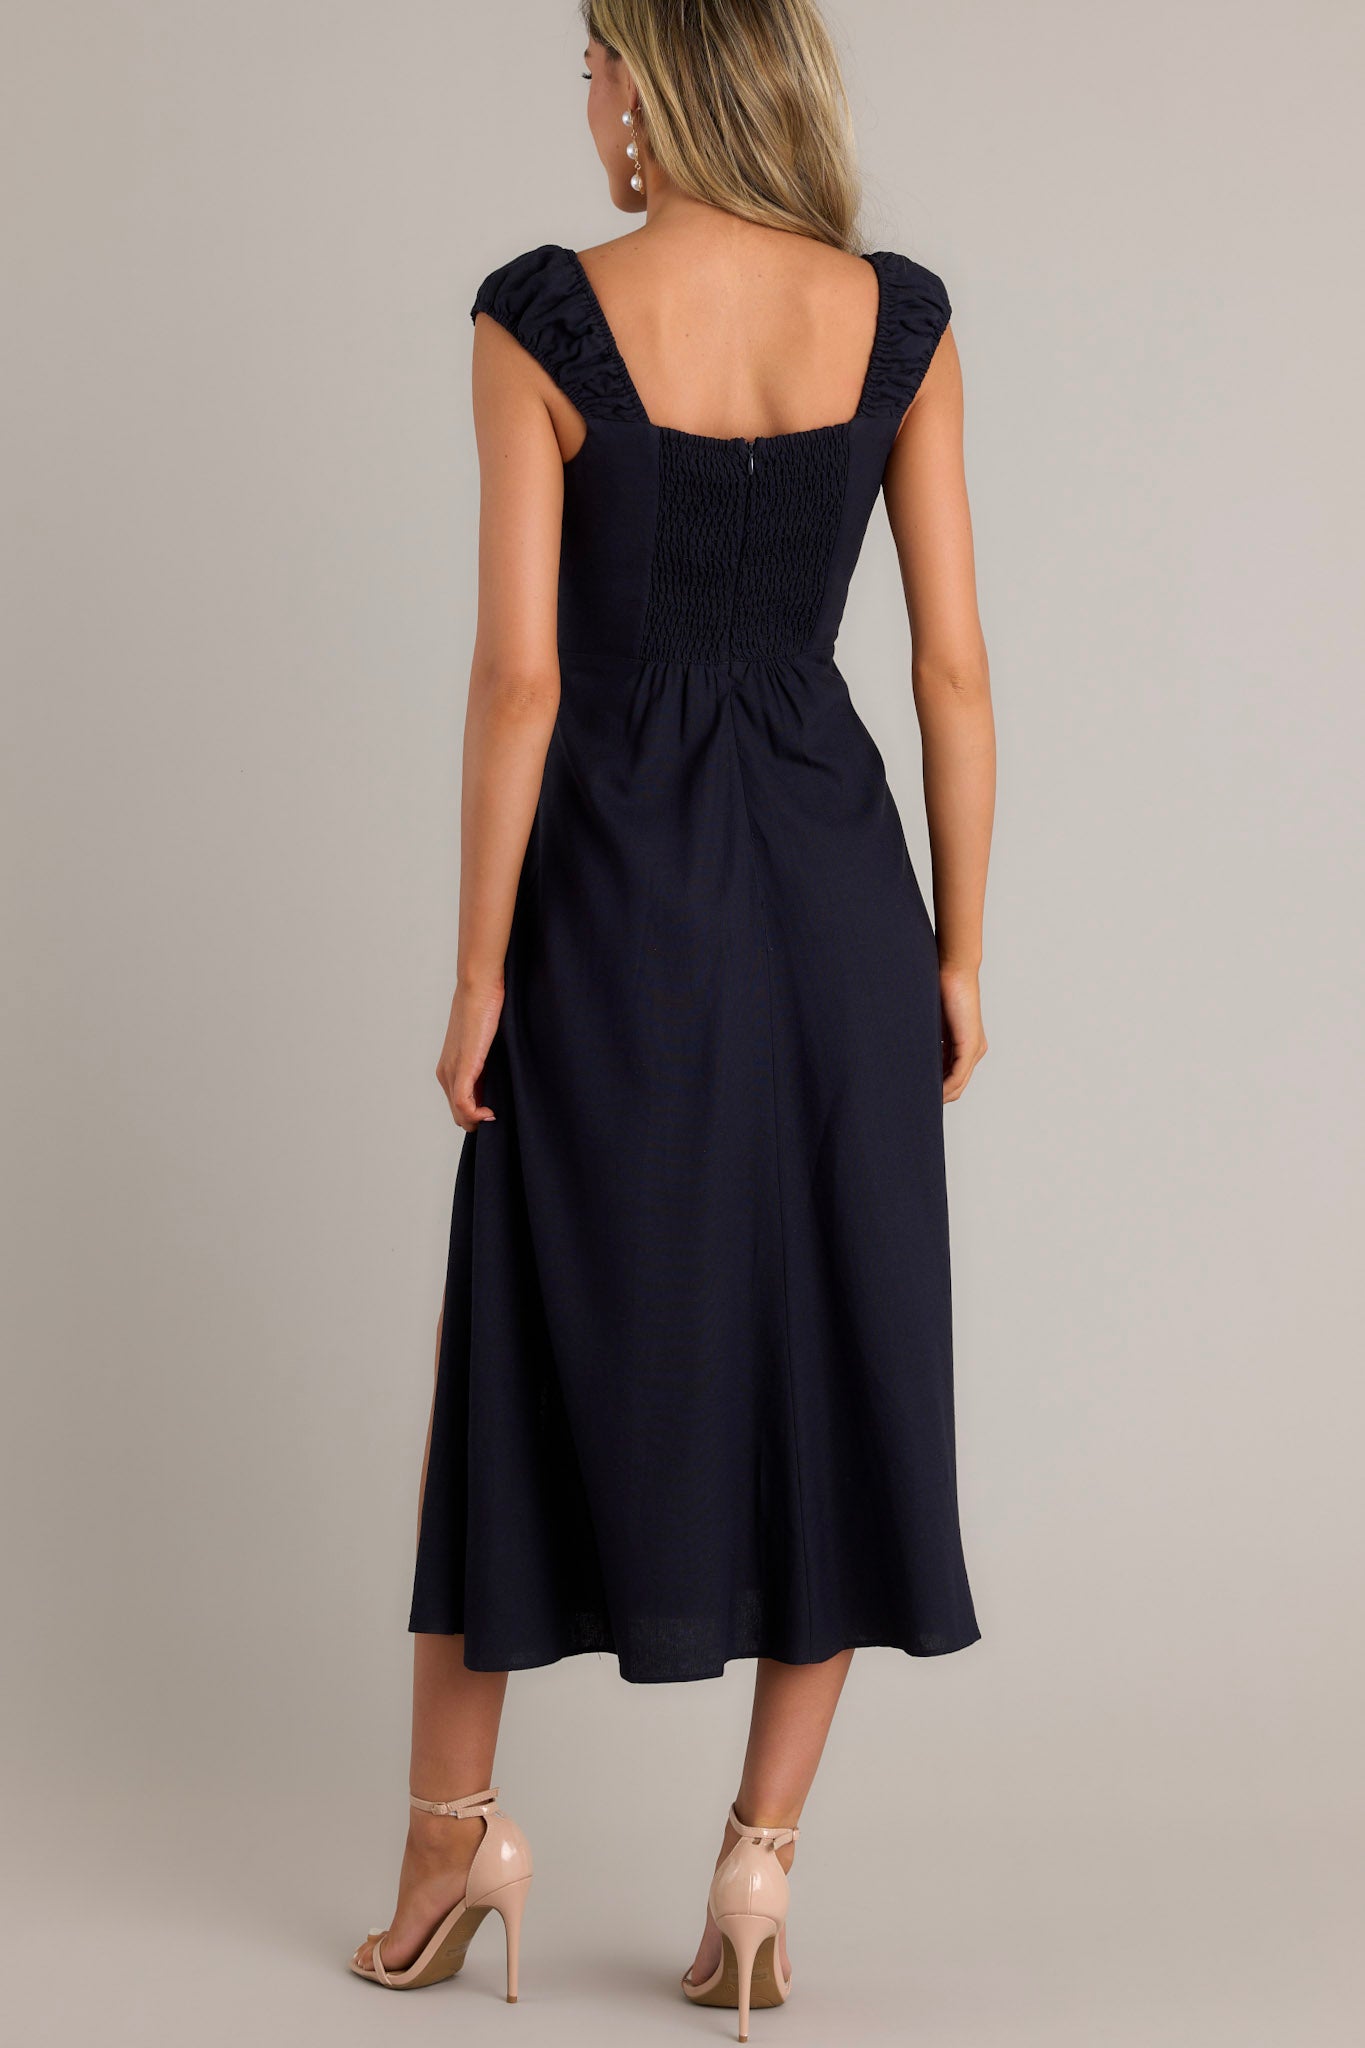 Back view of a navy midi dress highlighting the smocked section in the back, hidden zipper, and flowy skirt.